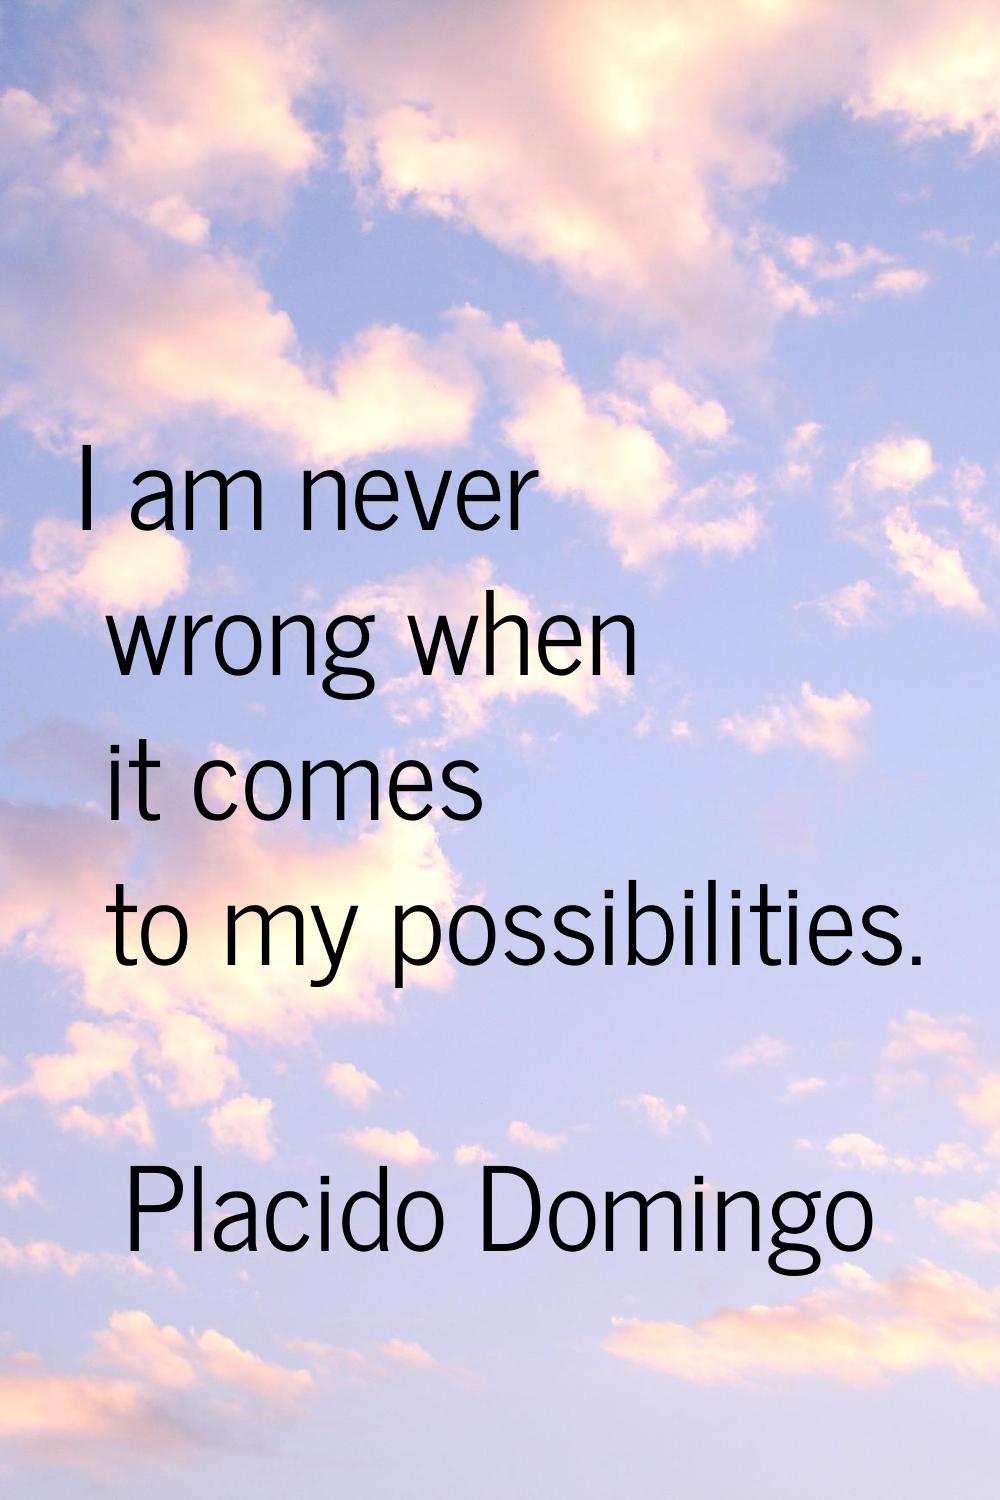 I am never wrong when it comes to my possibilities.